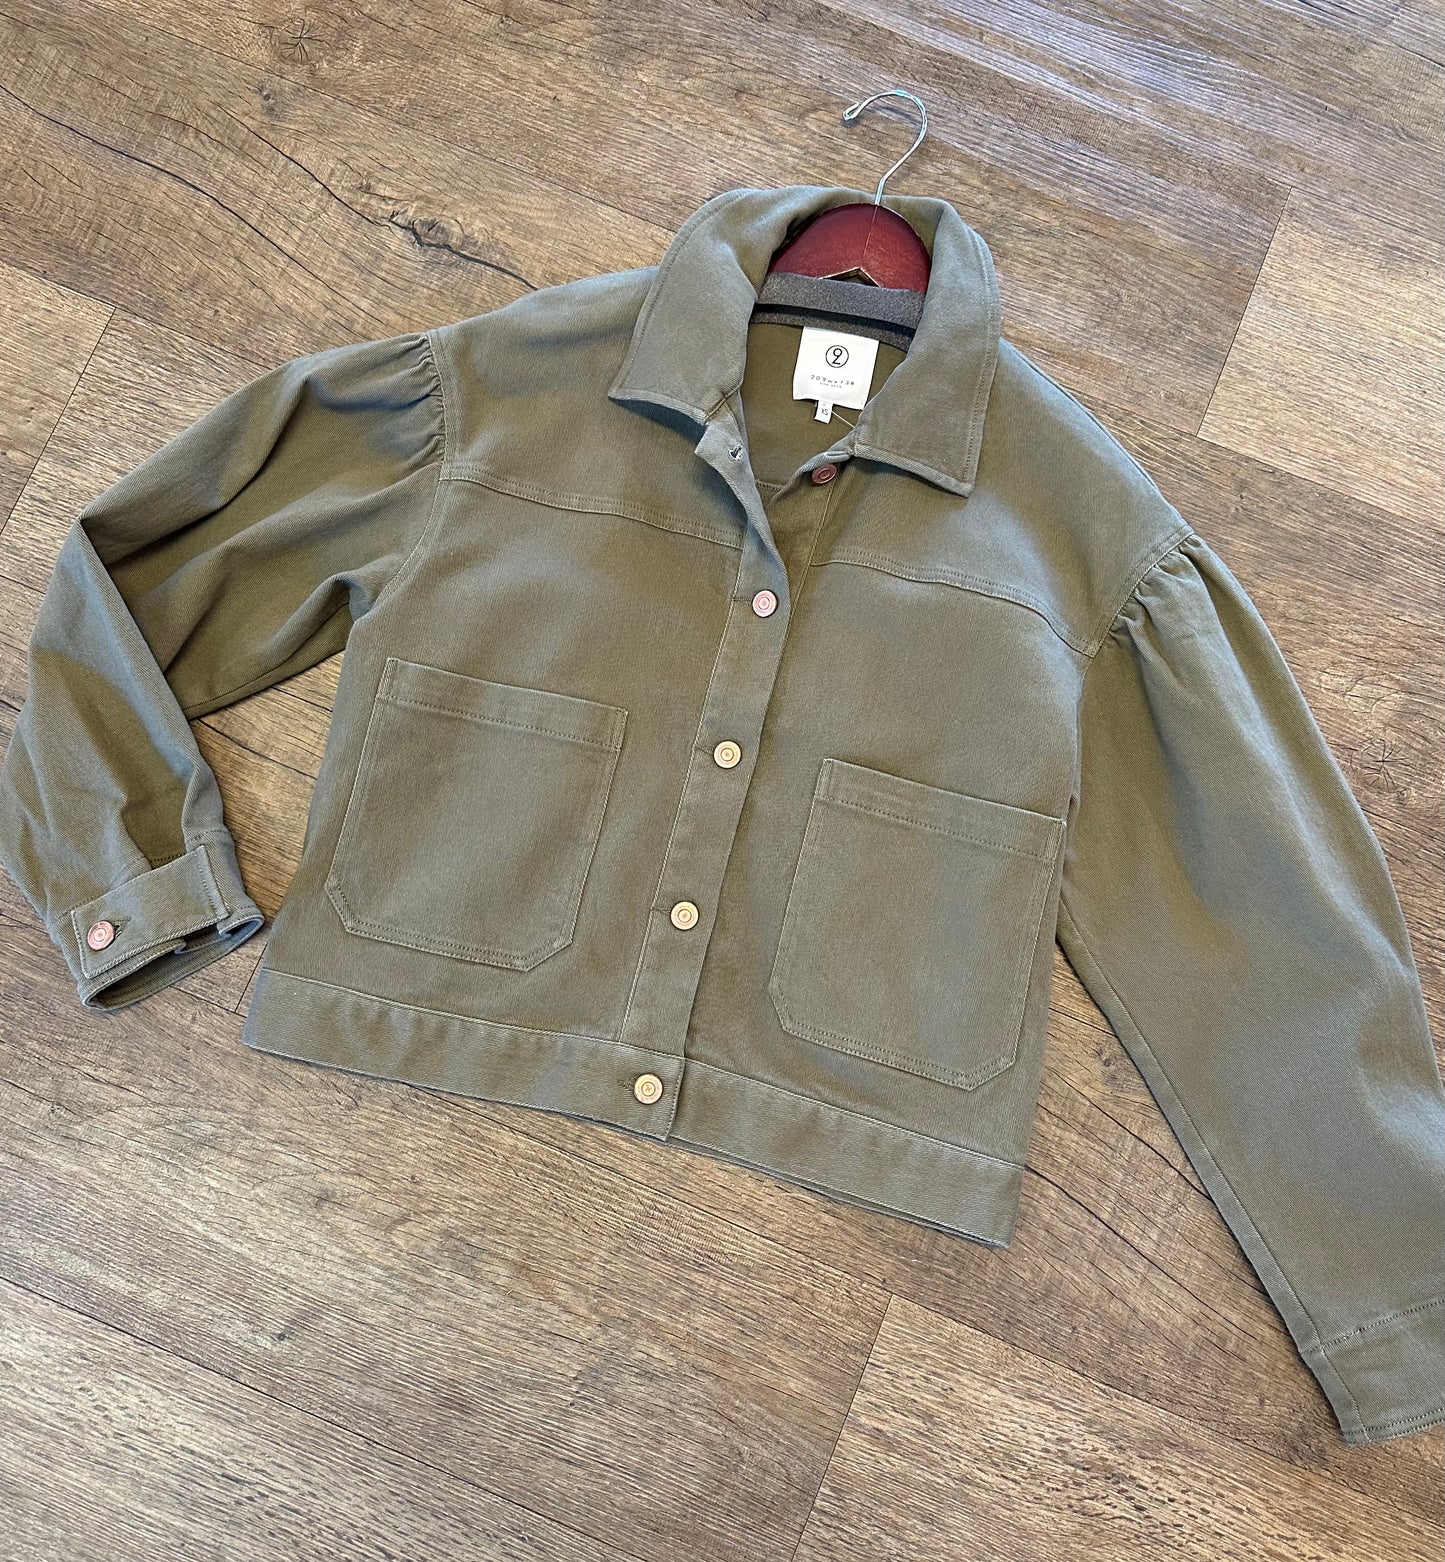 Puff Sleeve Cotton Twill Jacket in army by 209